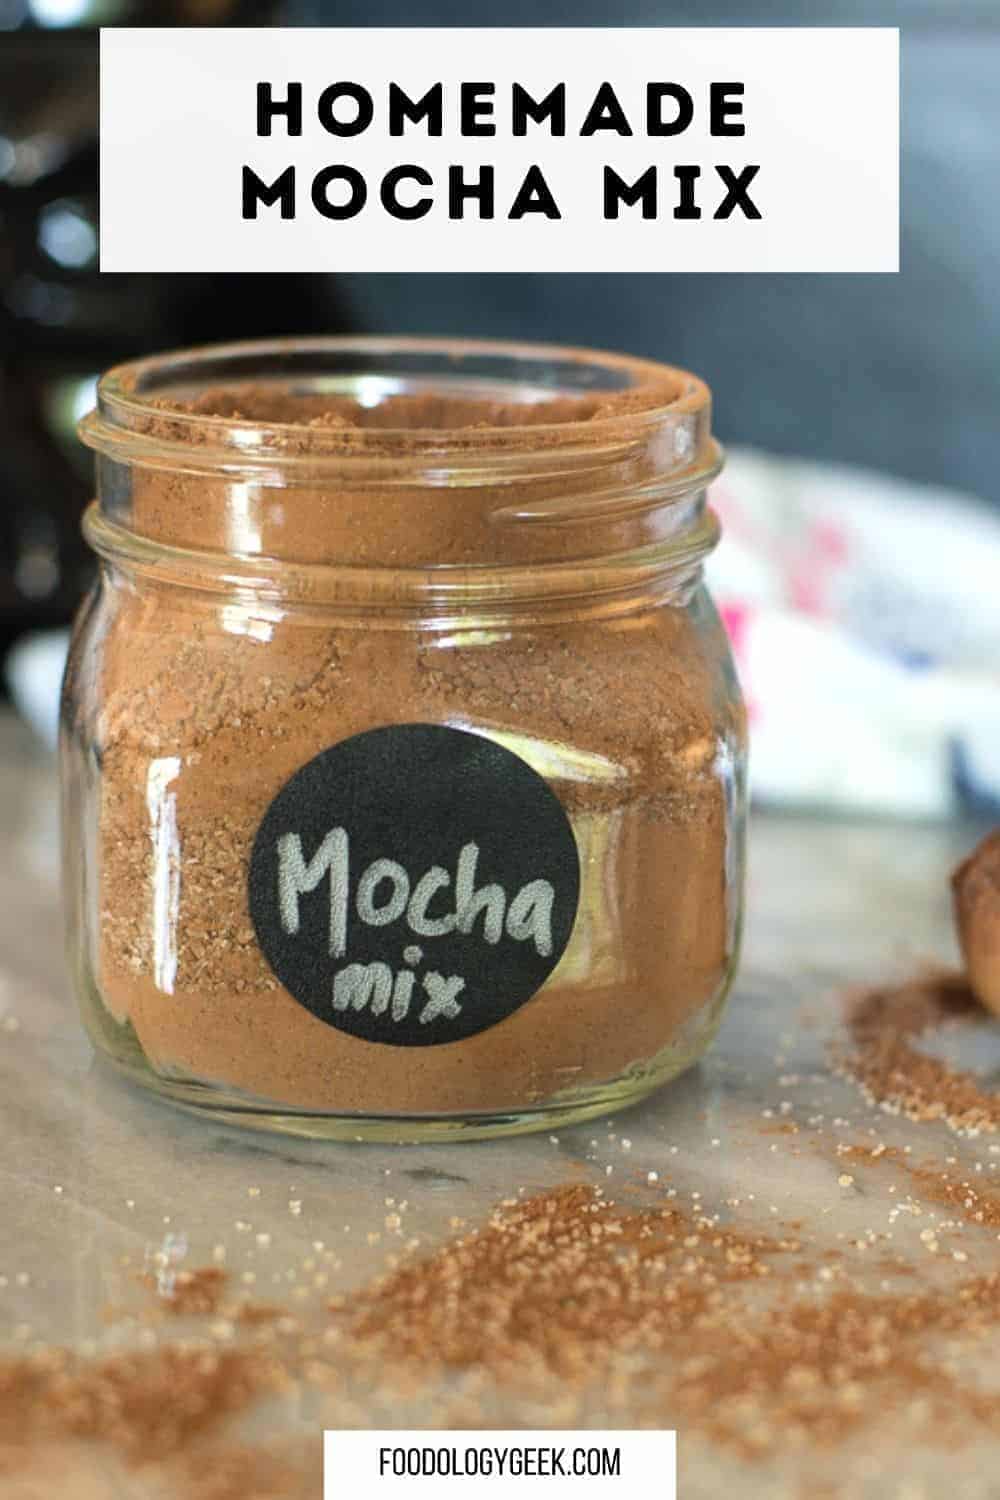 homemade mocha mix used for cafe latte or hot chocolate